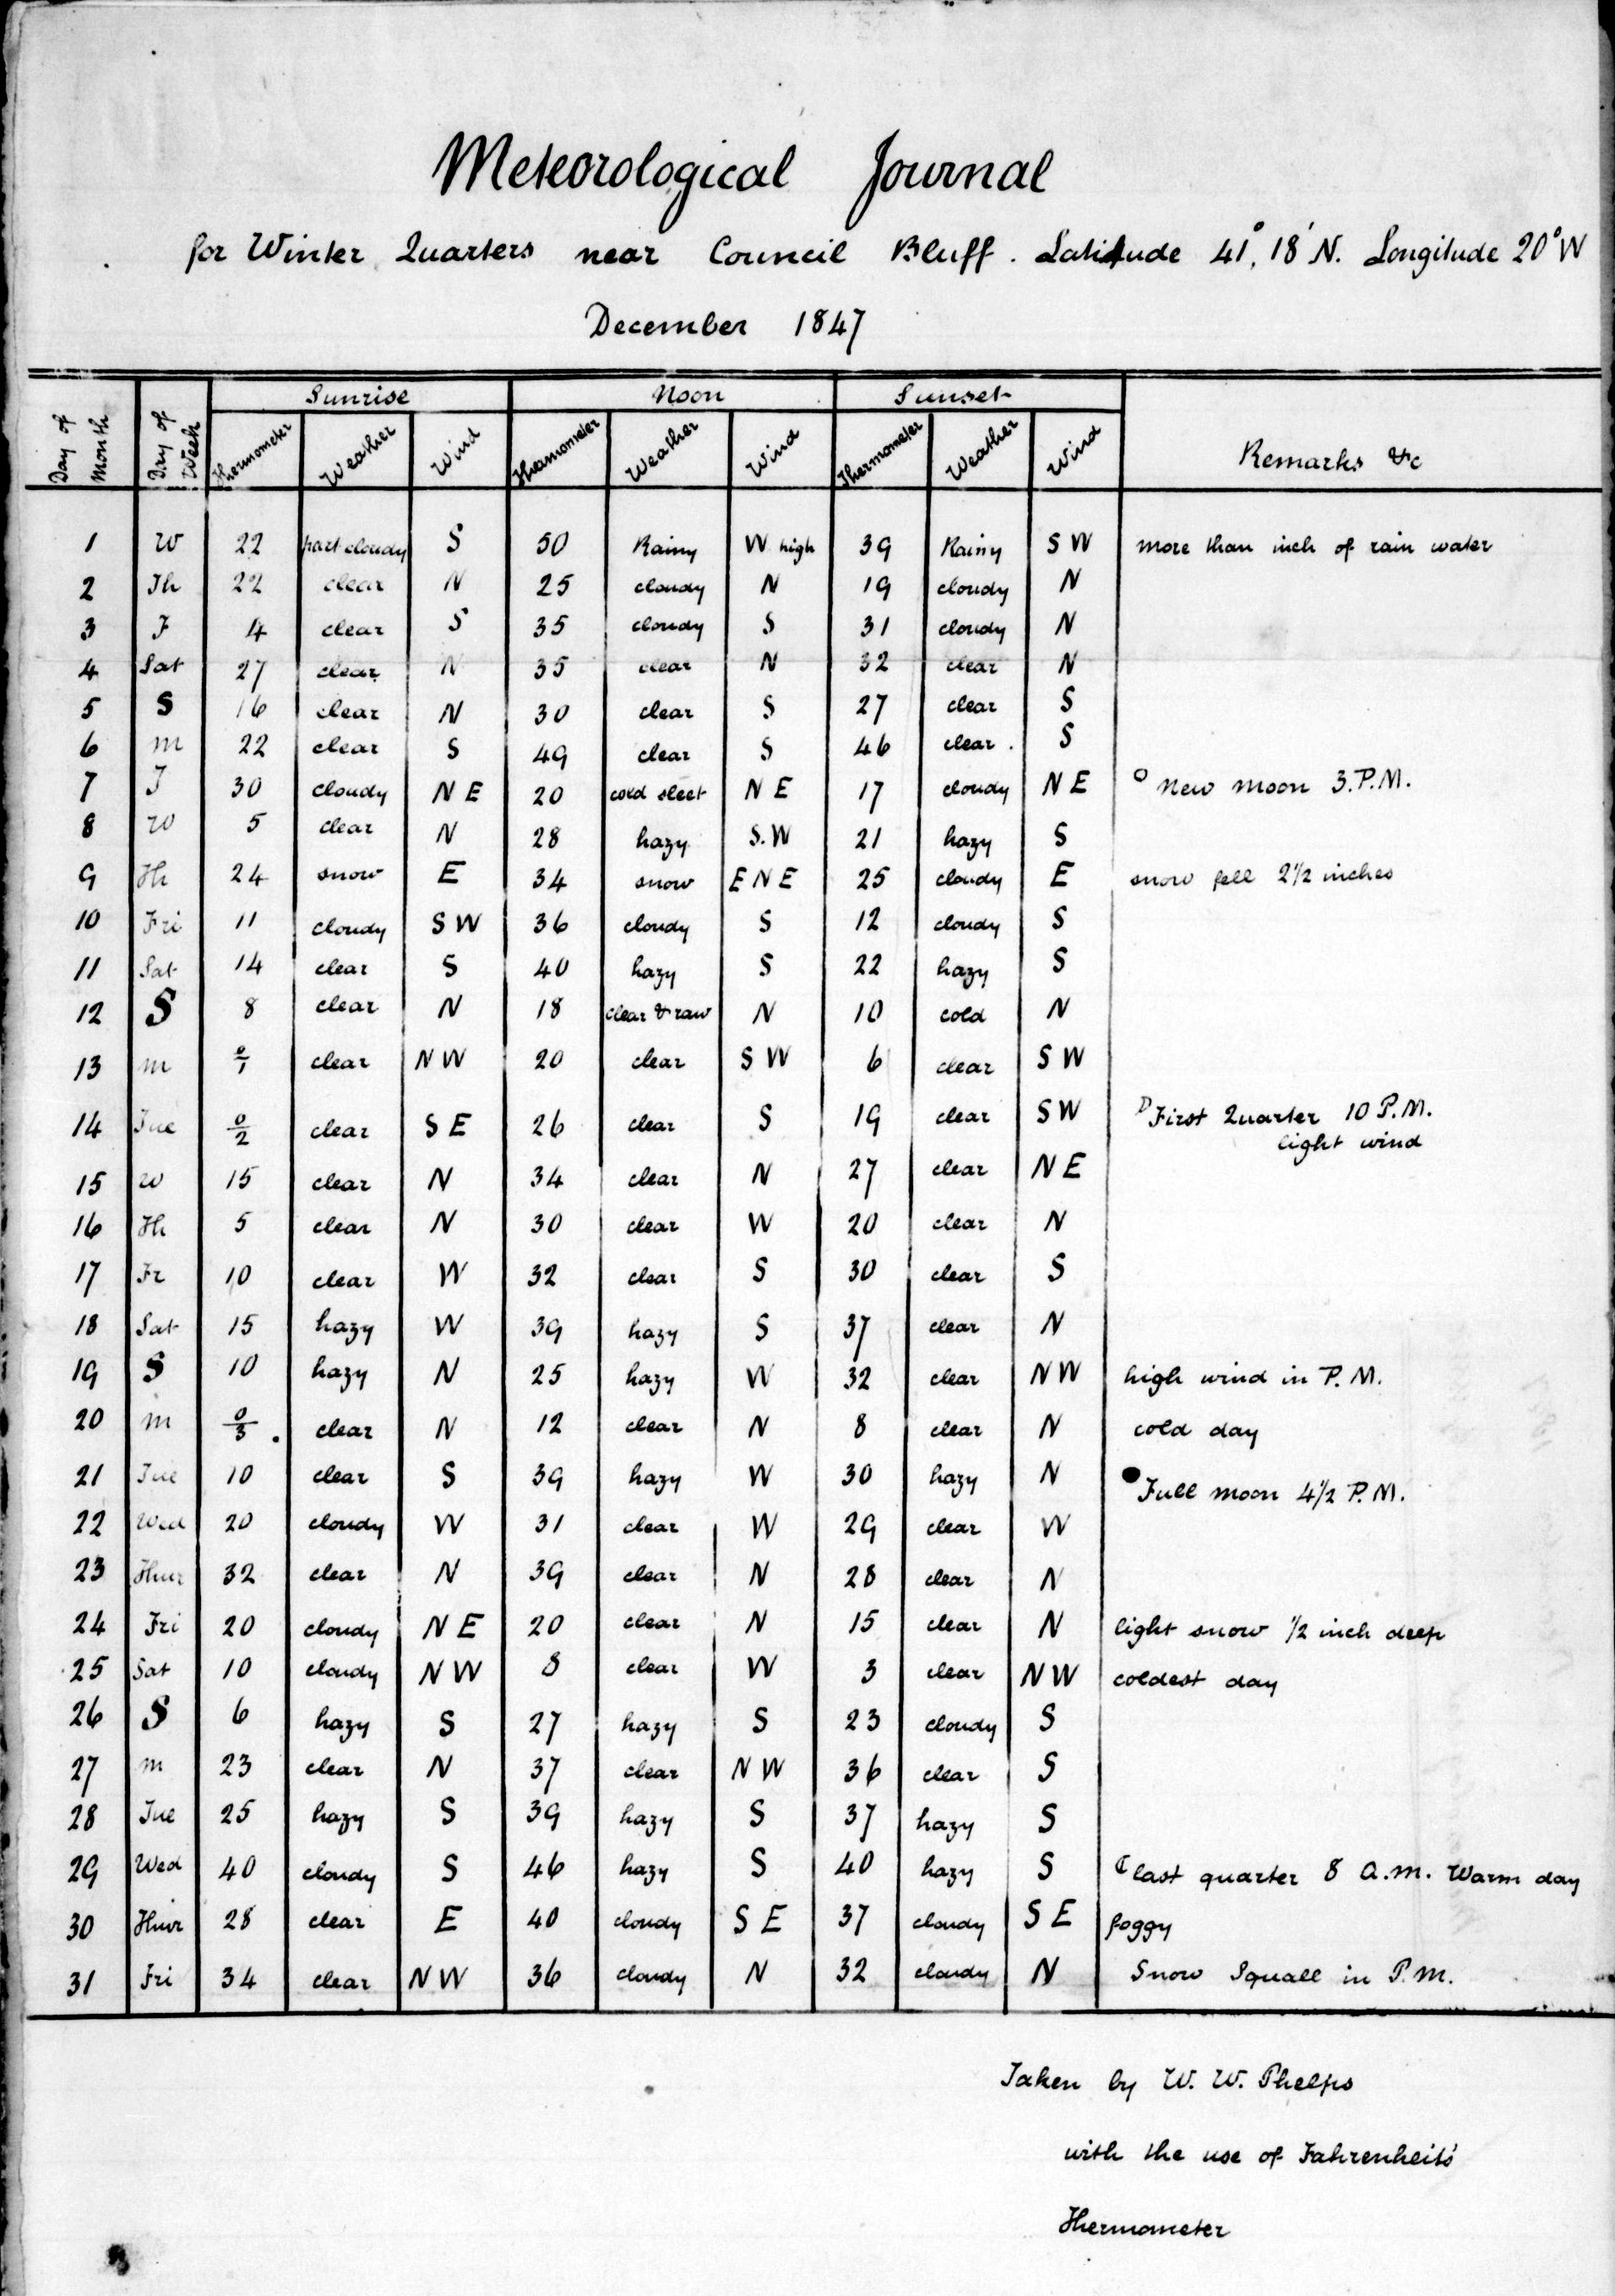 Phelps’s meteorological calculations in Winter Quarters